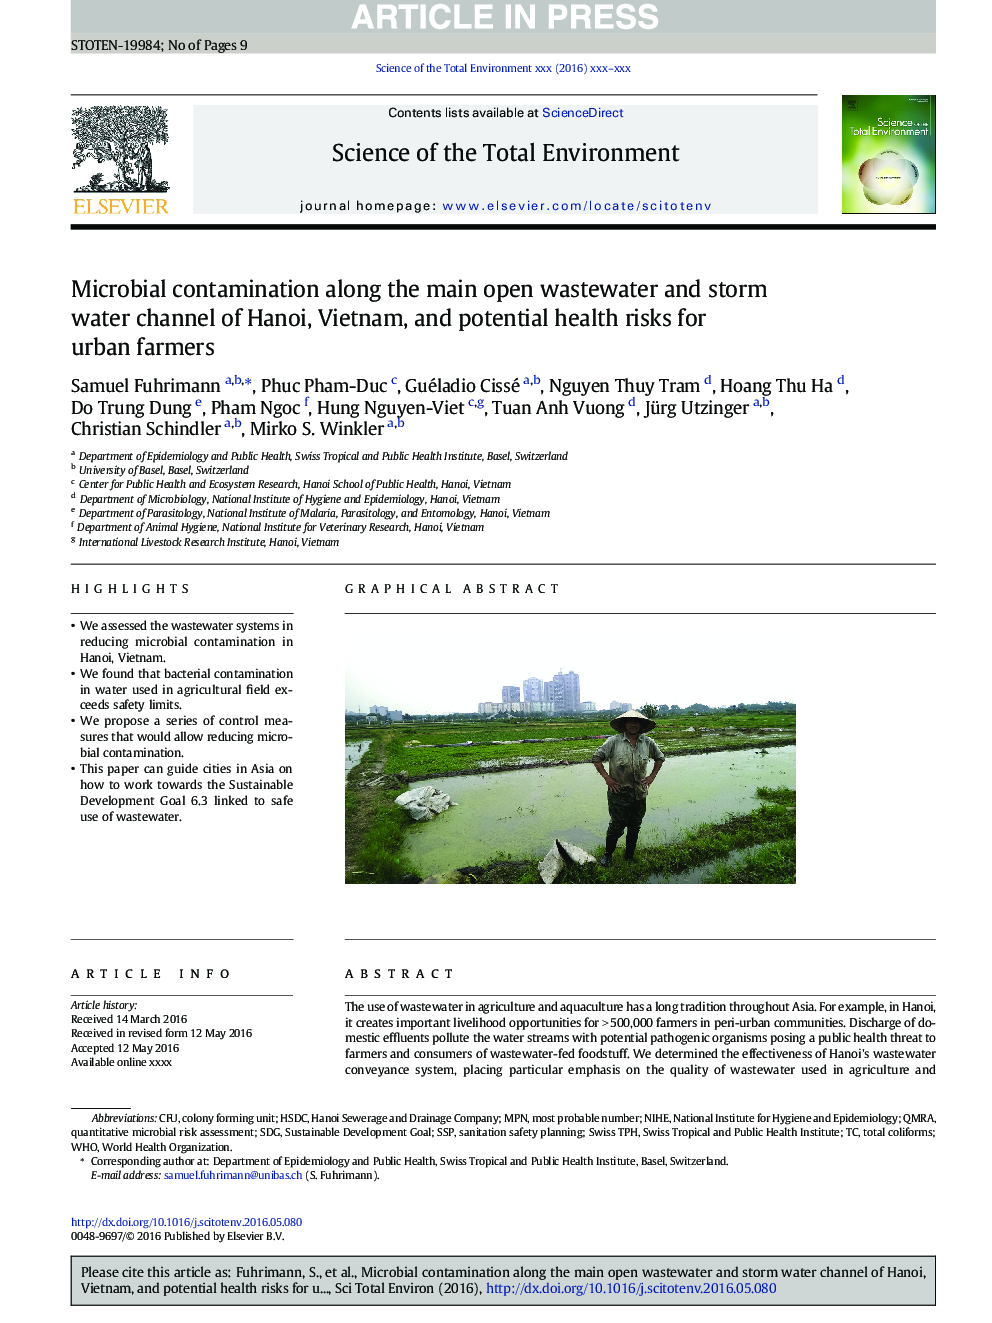 Microbial contamination along the main open wastewater and storm water channel of Hanoi, Vietnam, and potential health risks for urban farmers